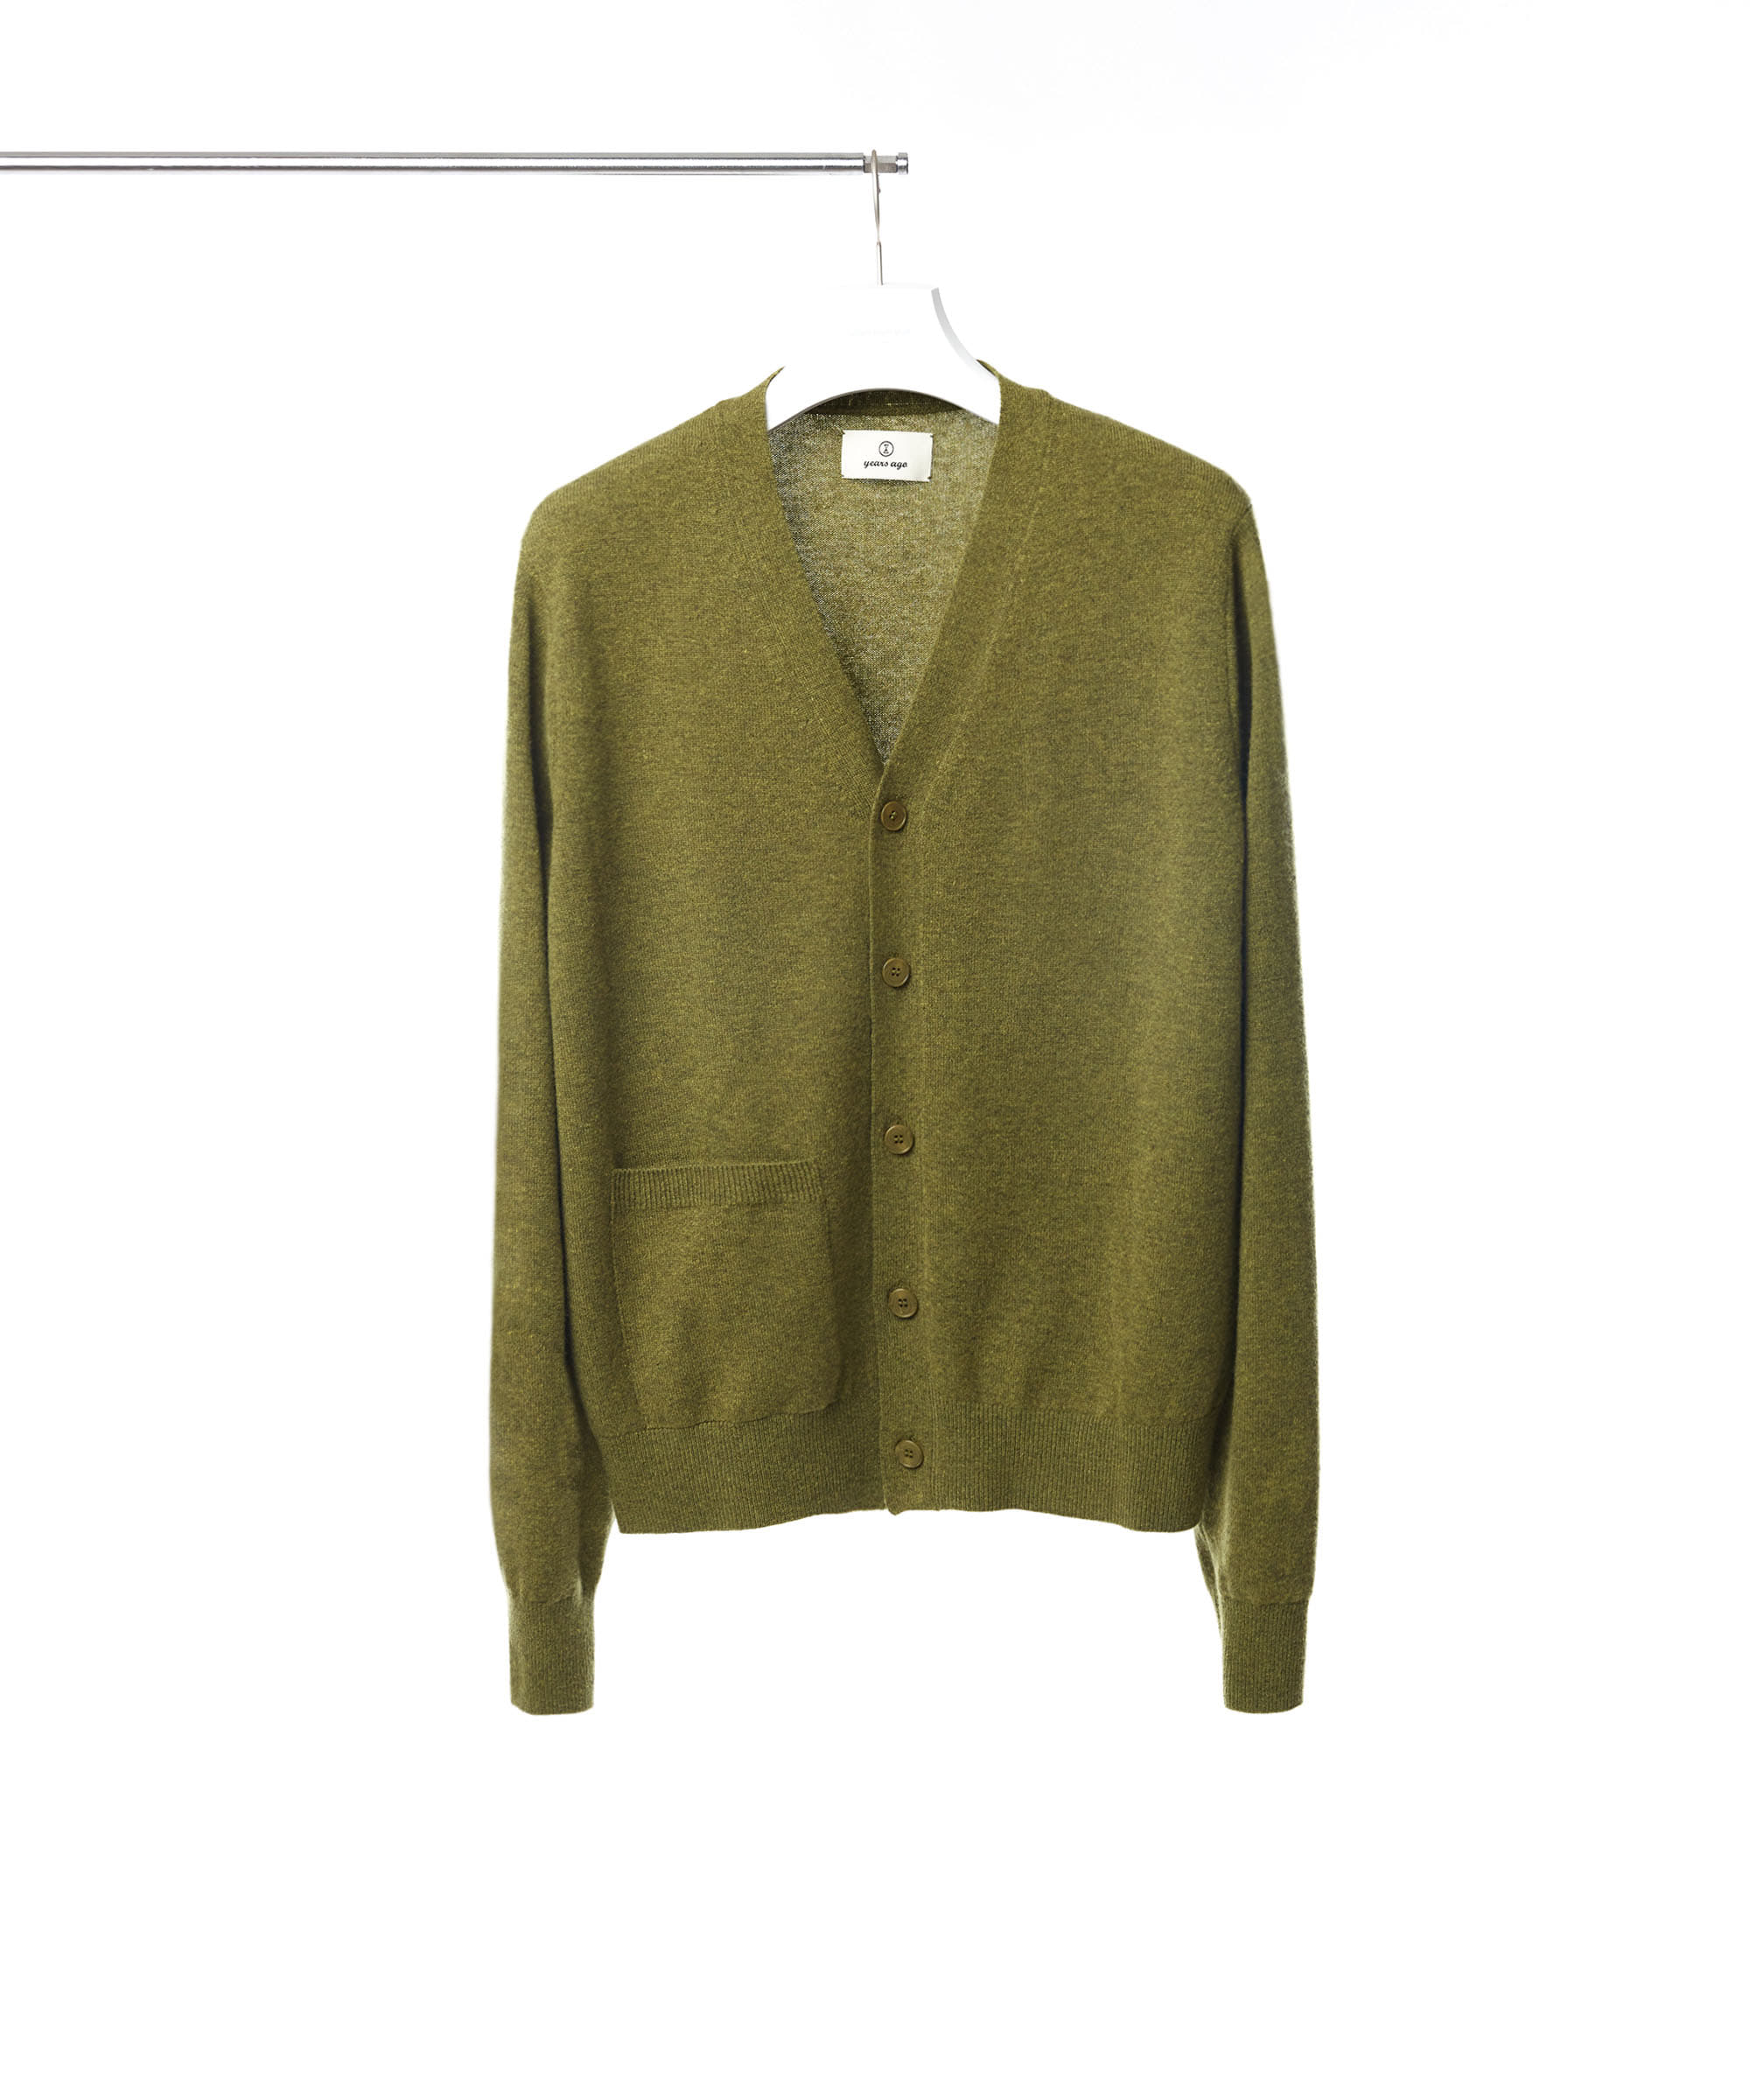 OLIVE ROVER WOOL CARDIGAN 02